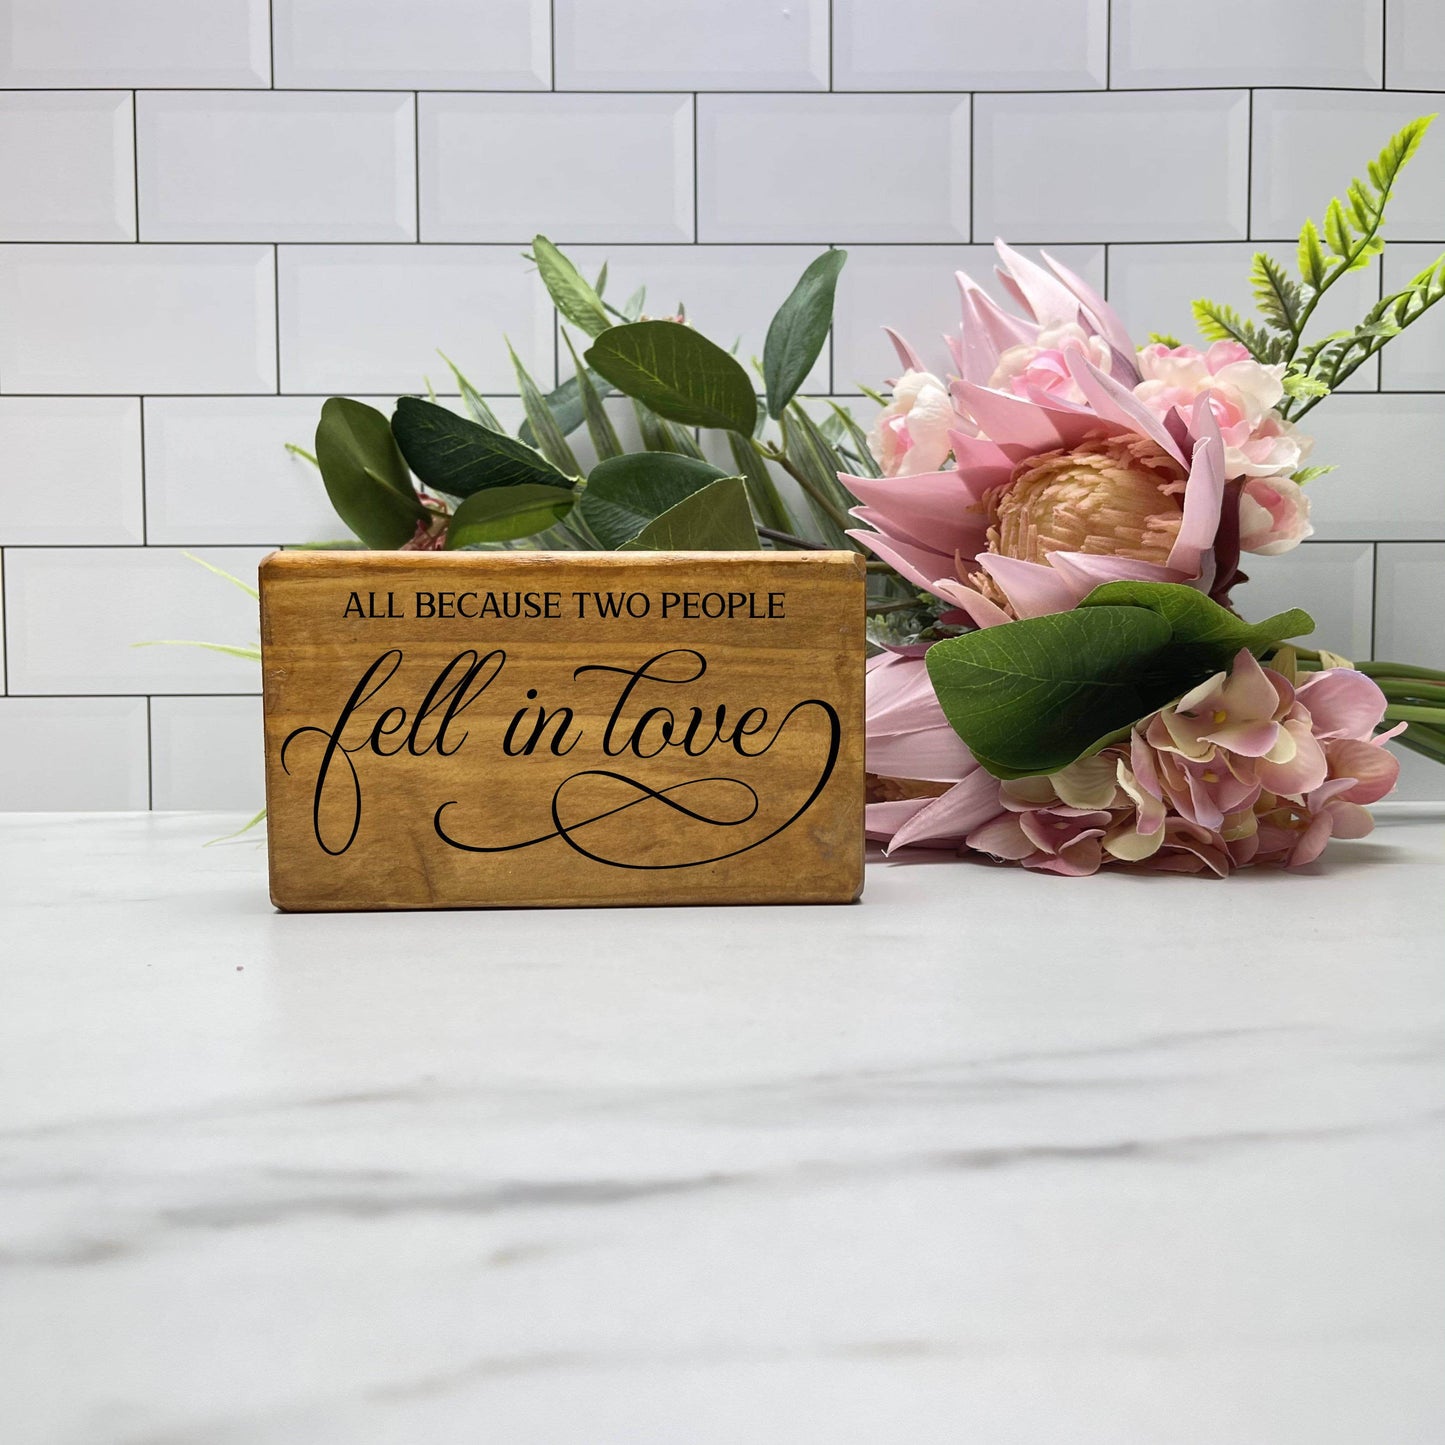 All Because 2 People Fell Inlove wood sign, love sign, couples gift sign, quote sign, home decor